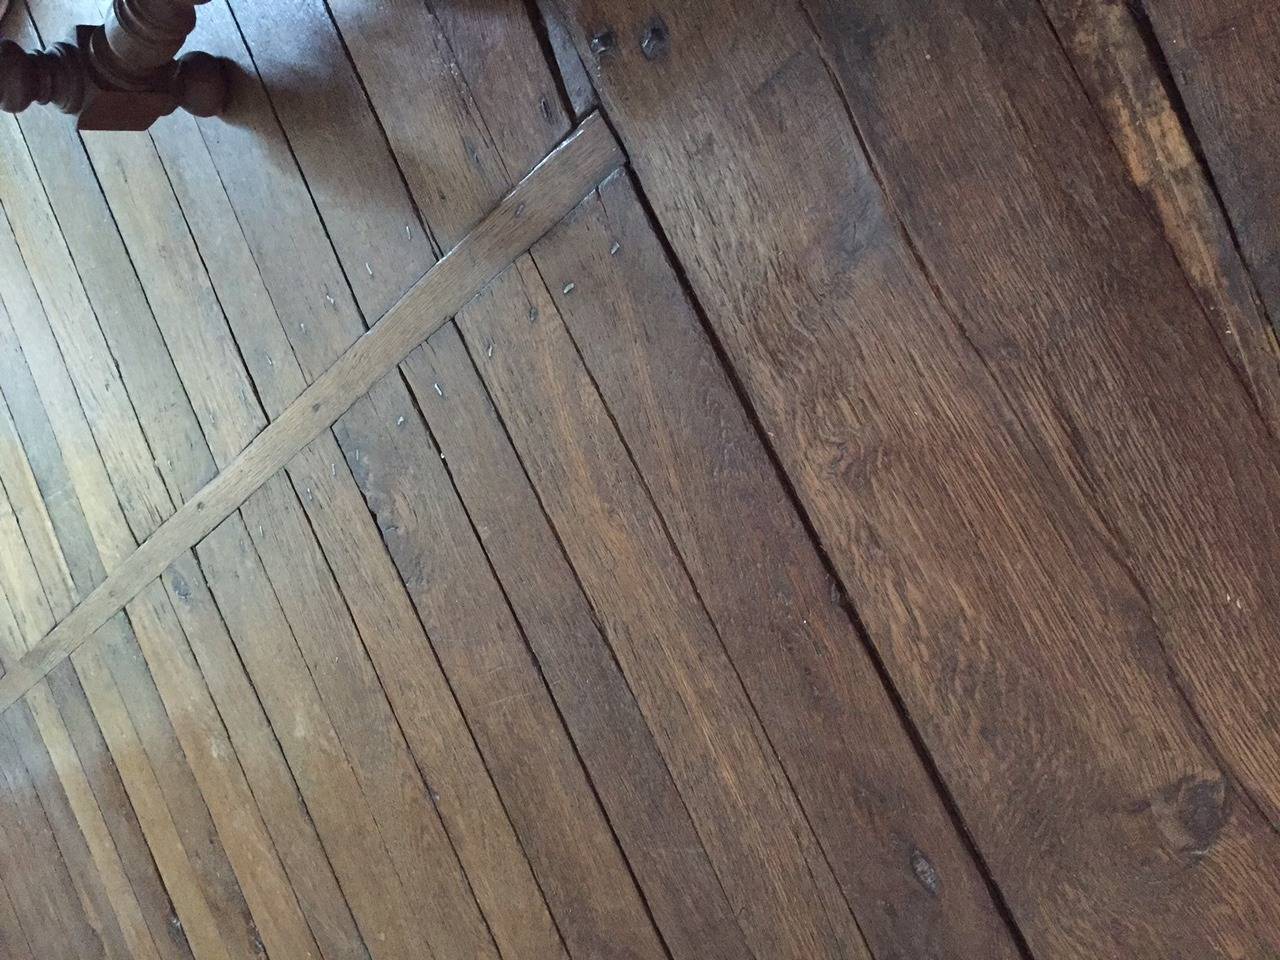 Authentic and unique reclaimed French antique wood oak flooring, 18th century.
Each plank has been handled eight times at least, to clean, to restore, to make it ready for new installation.
Original and rare. We have 3,500 square feet available